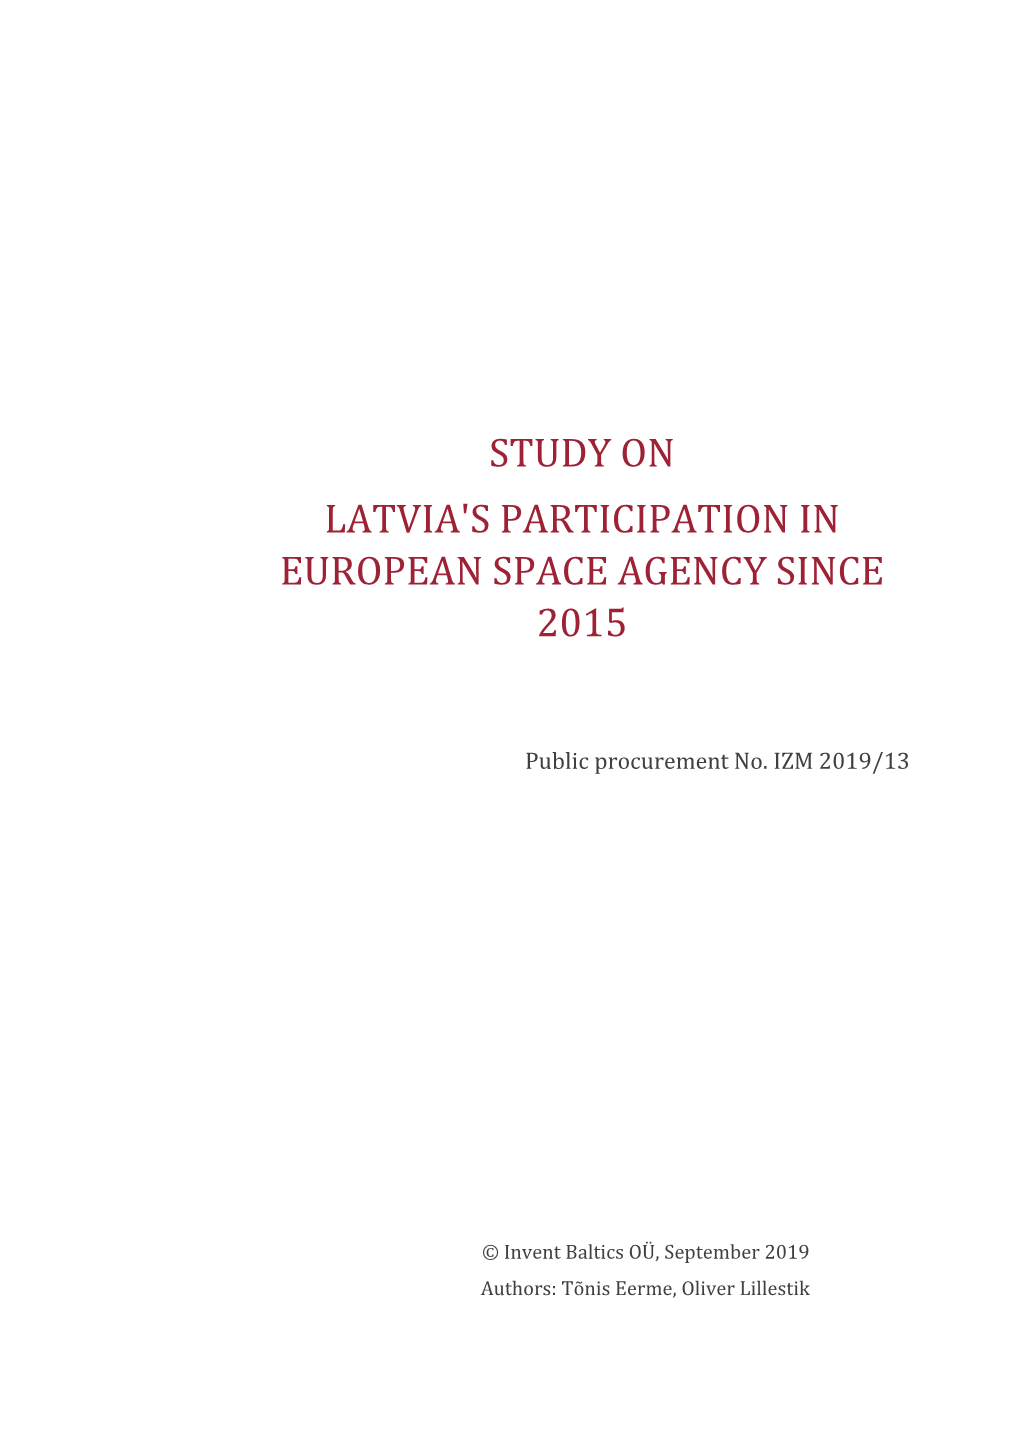 Study on Latvia's Participation in European Space Agency Since 2015